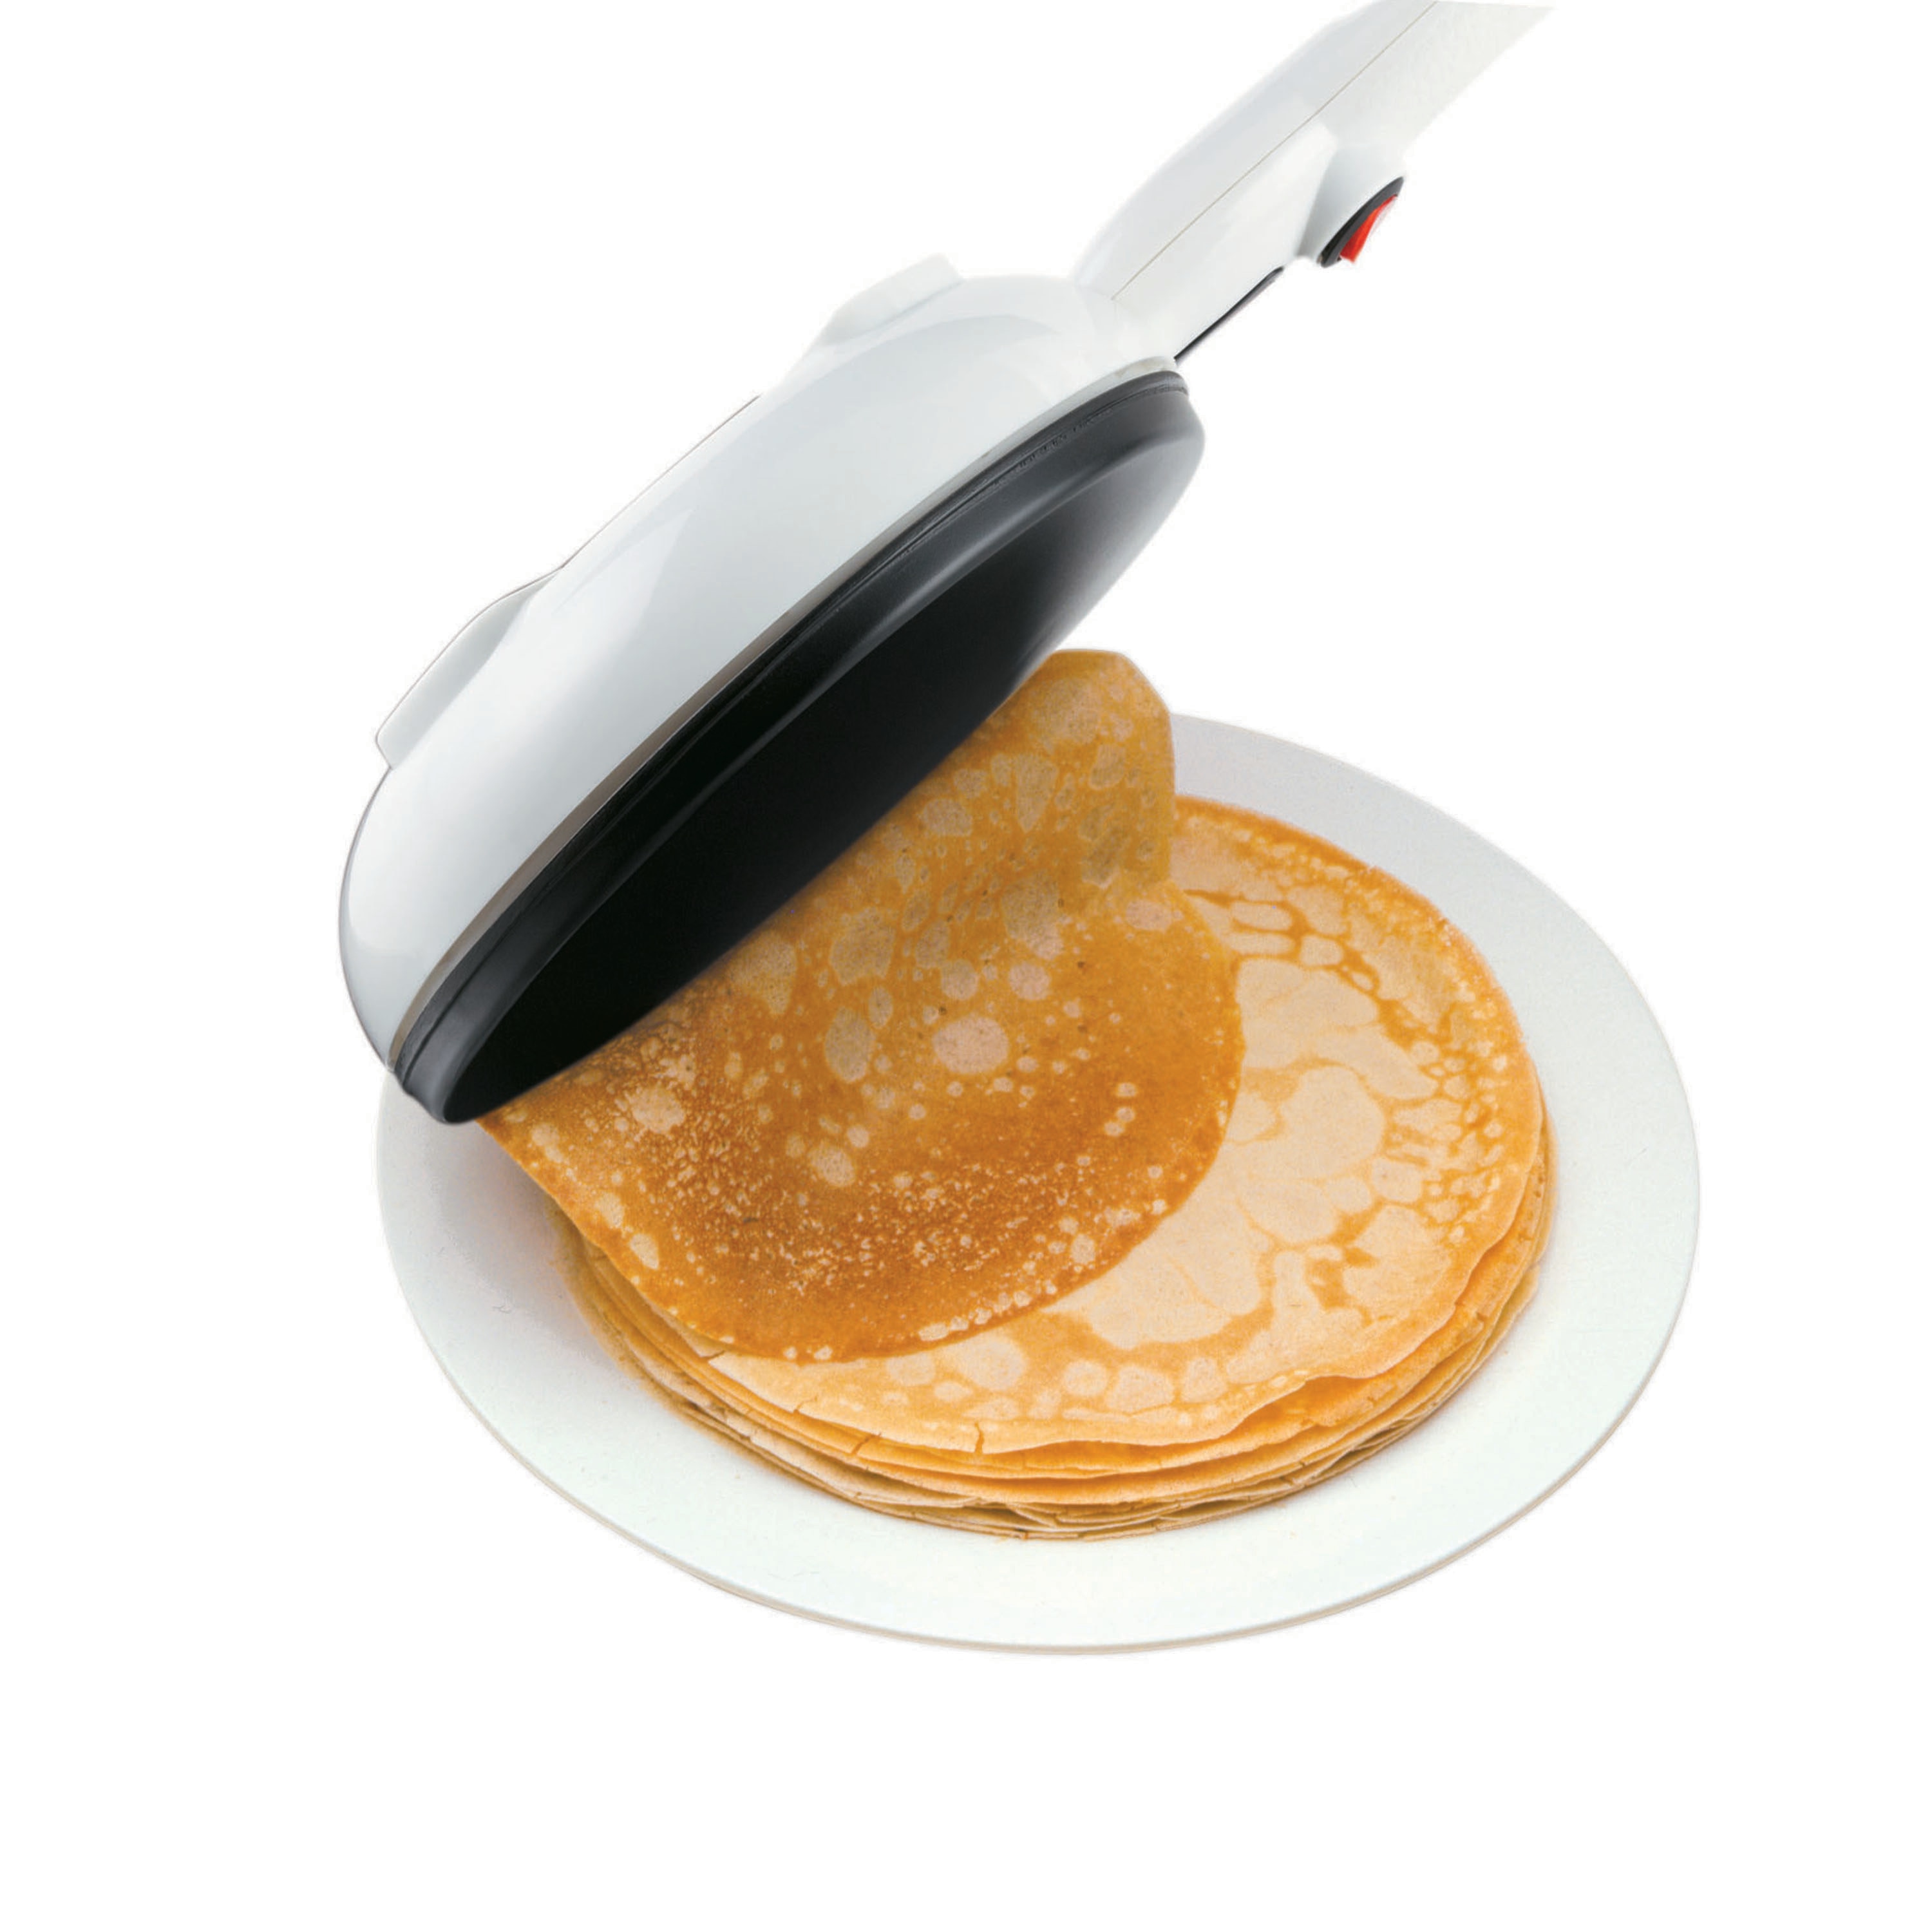  Instant Crepe Maker, Portable Electric Crepe Maker & Non-Stick  Dipping Plate with Auto Power Off, Automatic Temperature Control, Batter  Bowl and Egg Beater for Crepes,Pancakes,Tortillas (Orange): Home & Kitchen